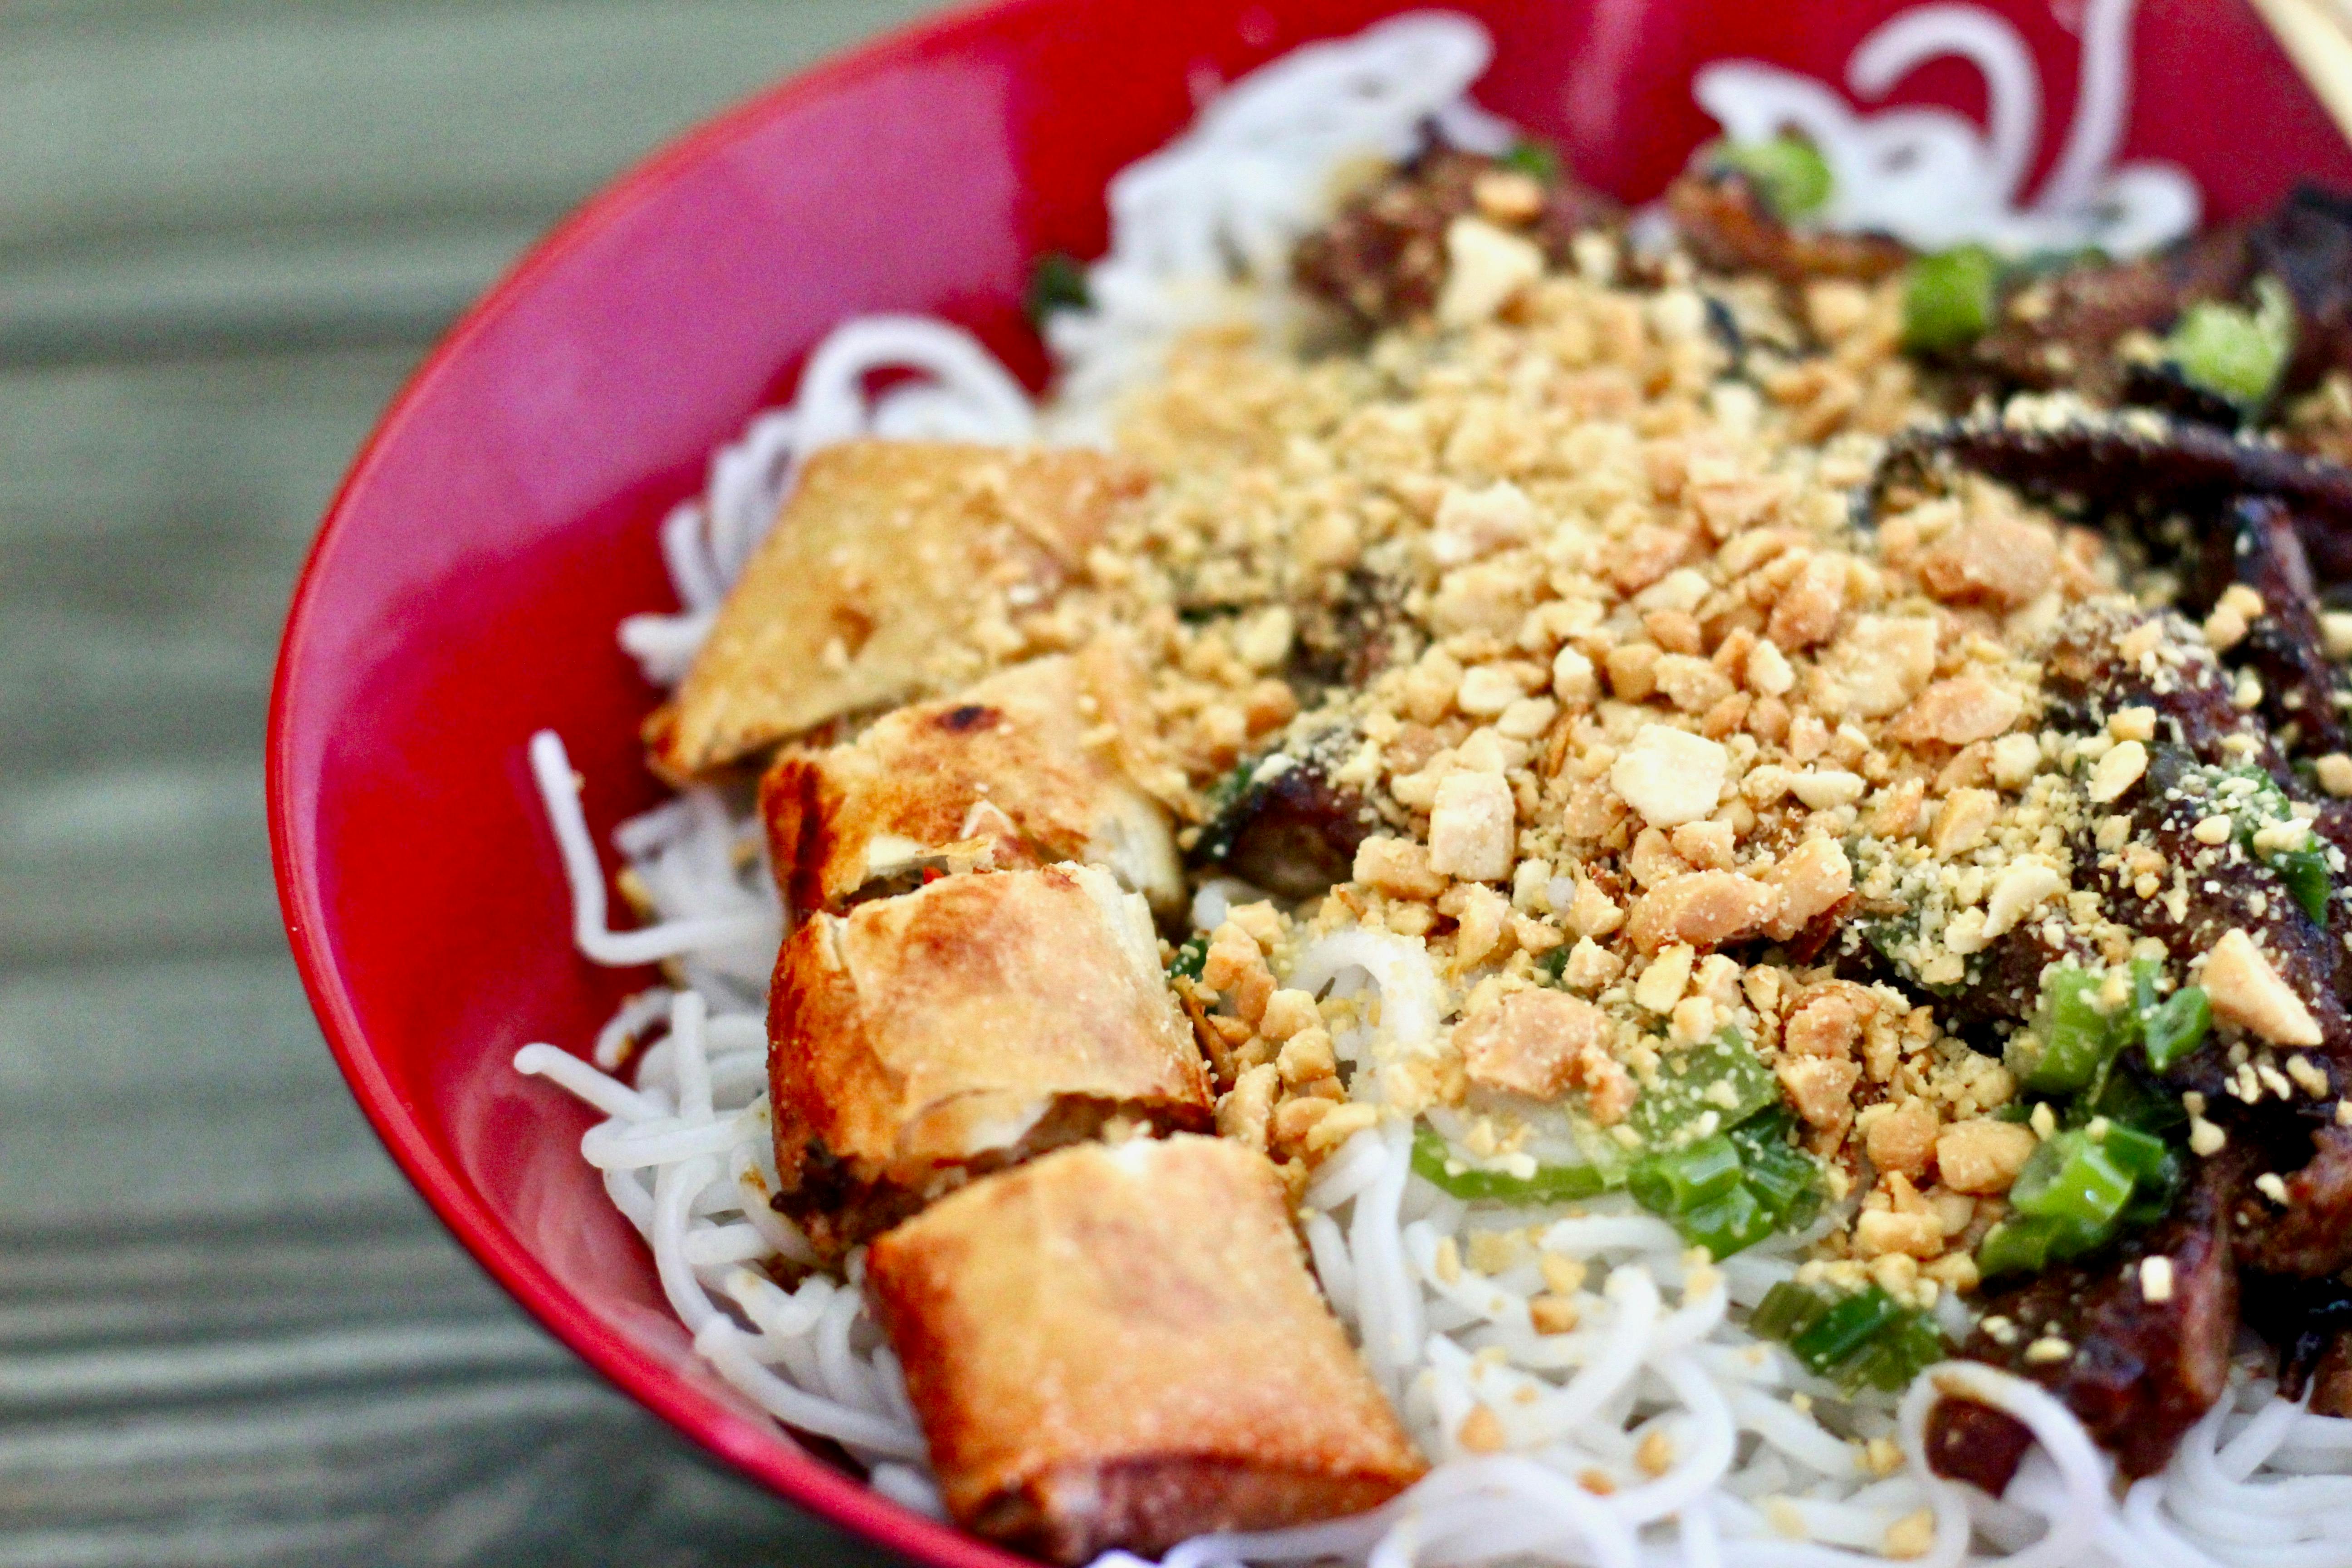 N5. Bun Cha Gio Thit Nuong from Little Asia in Richmond, VA